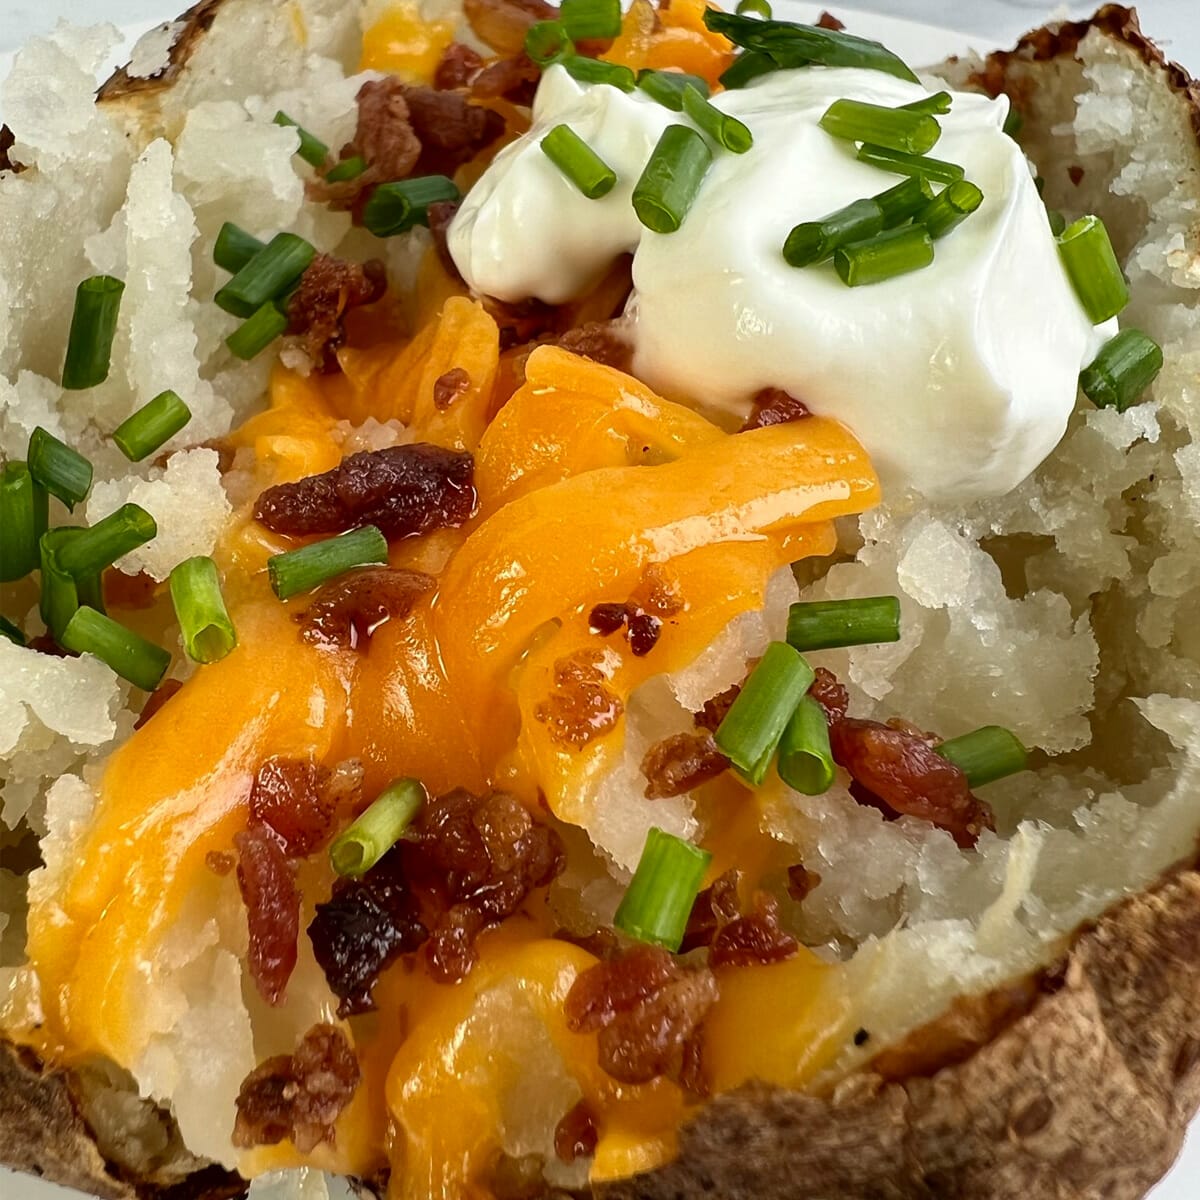 The Best Method for Making Baked Potatoes? the Air Fryer.